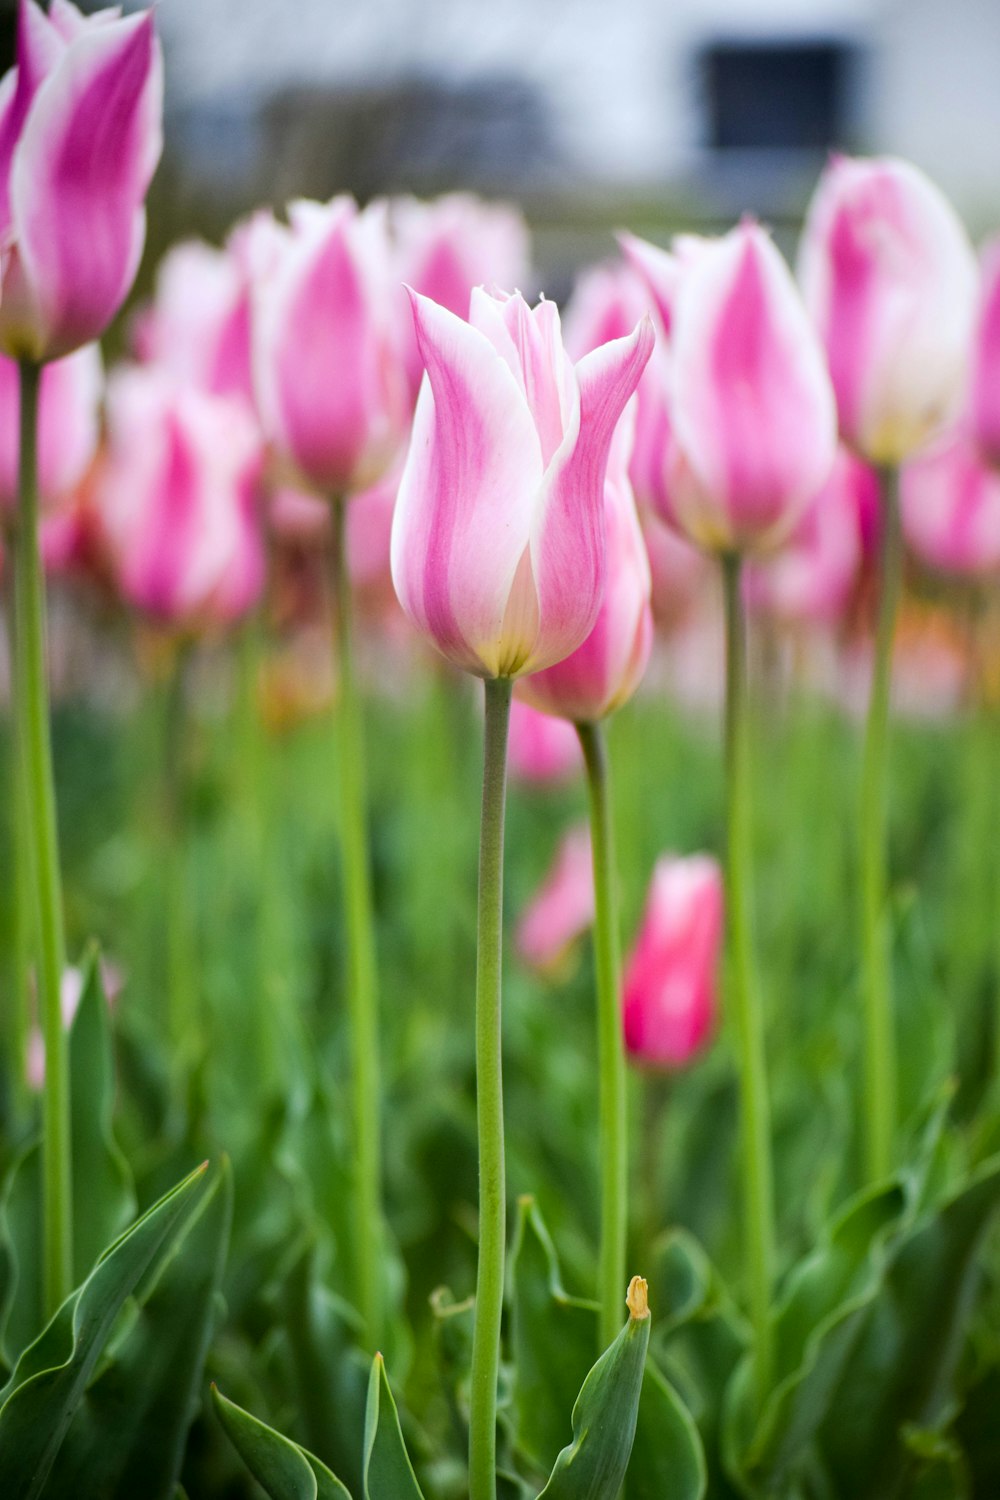 pink and white tulips on green grass field during daytime